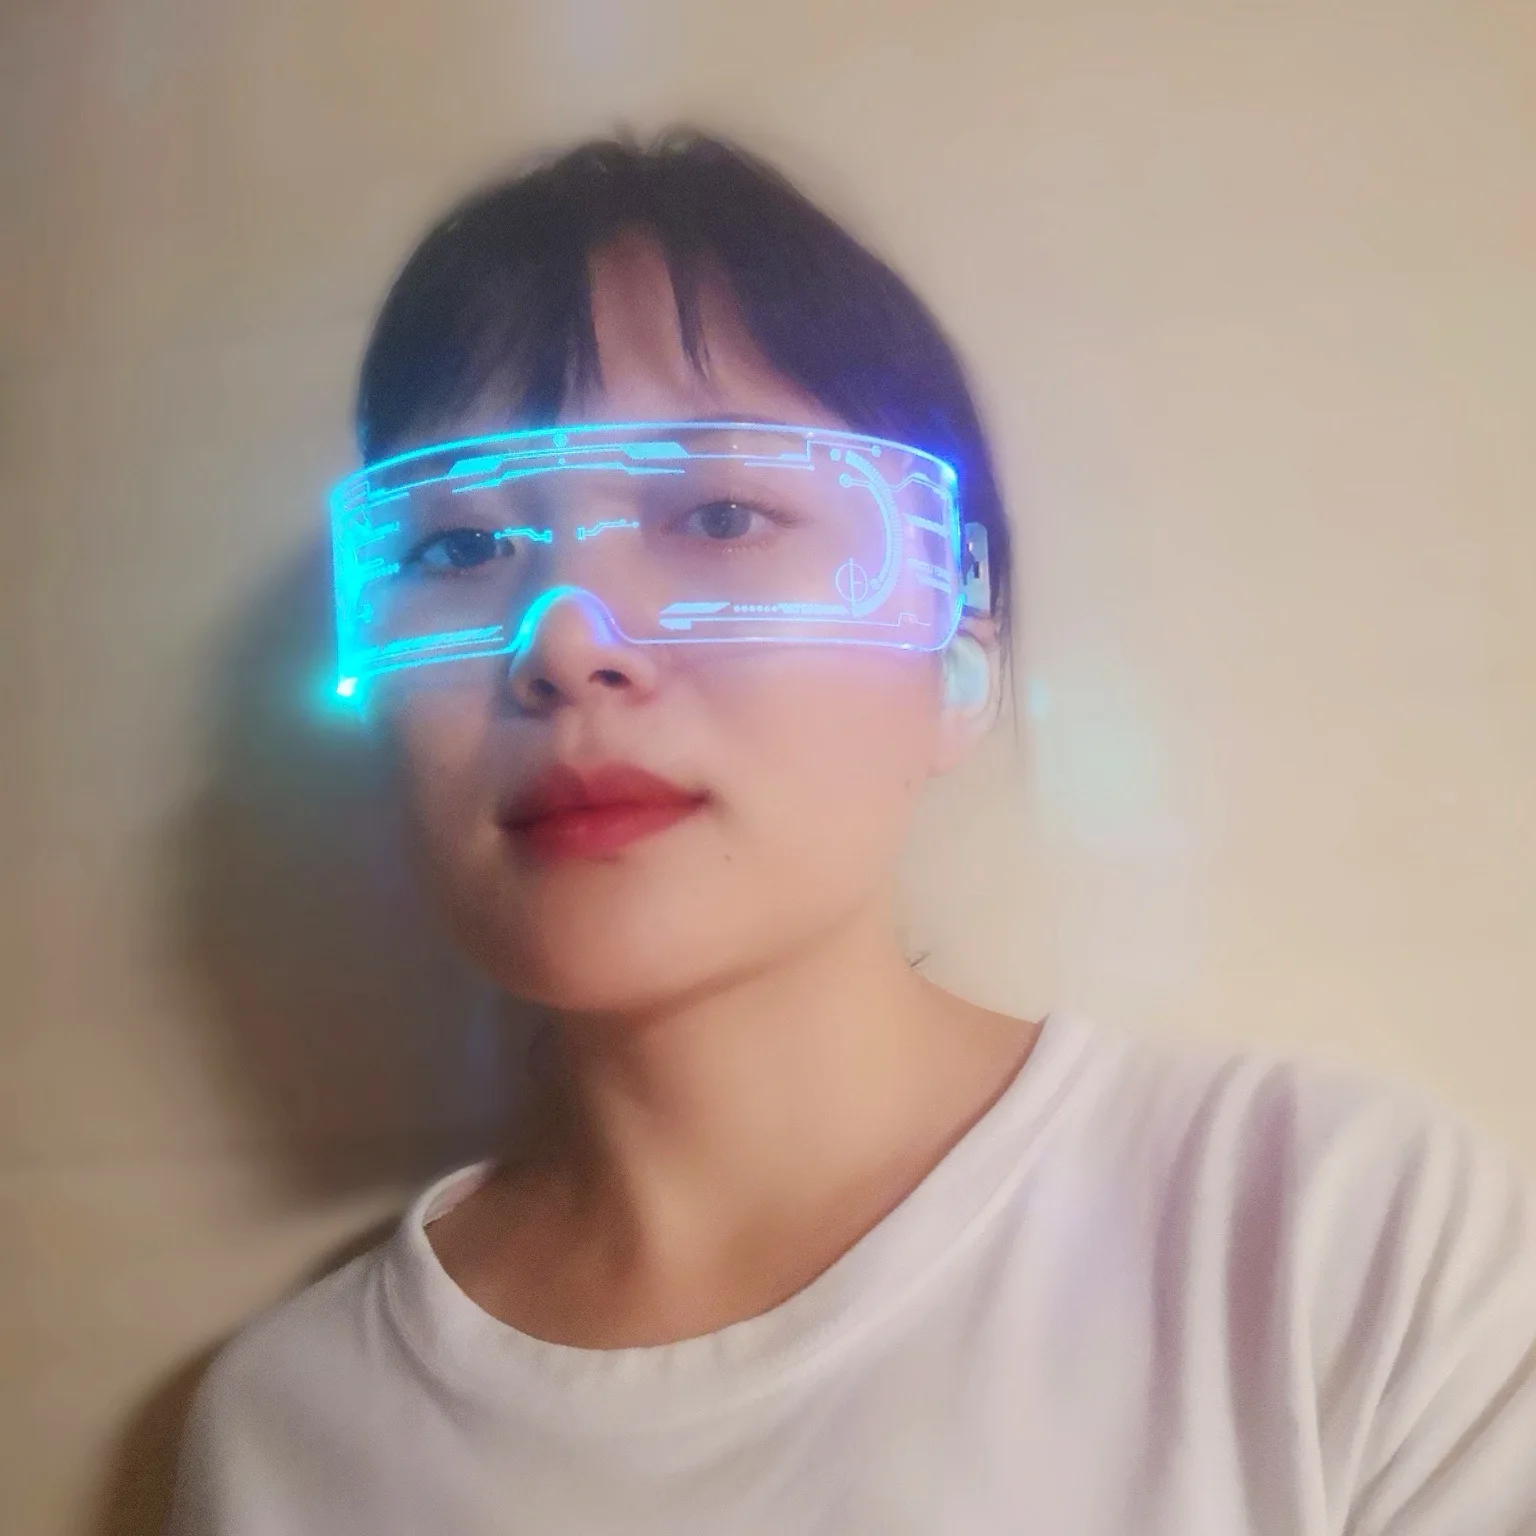 

2021Colorful LED Acrylic Glowing Glasses High-tech Sense Party Prom Halloween Gift Future Technology Sense Birthday Gift